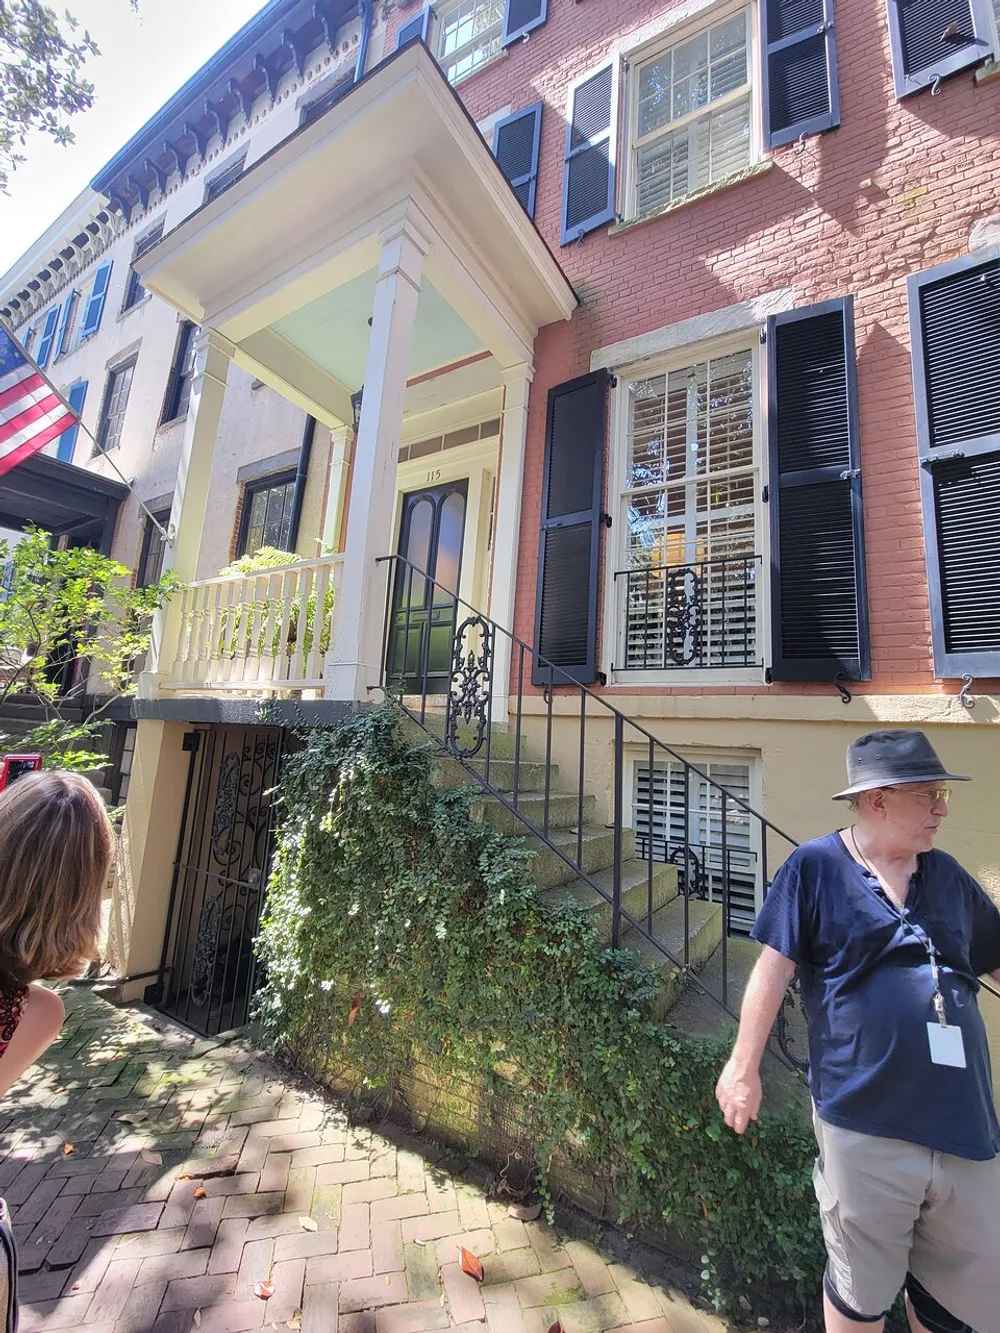 A person is walking by a traditional brick building with black shutters a small front porch and an American flag